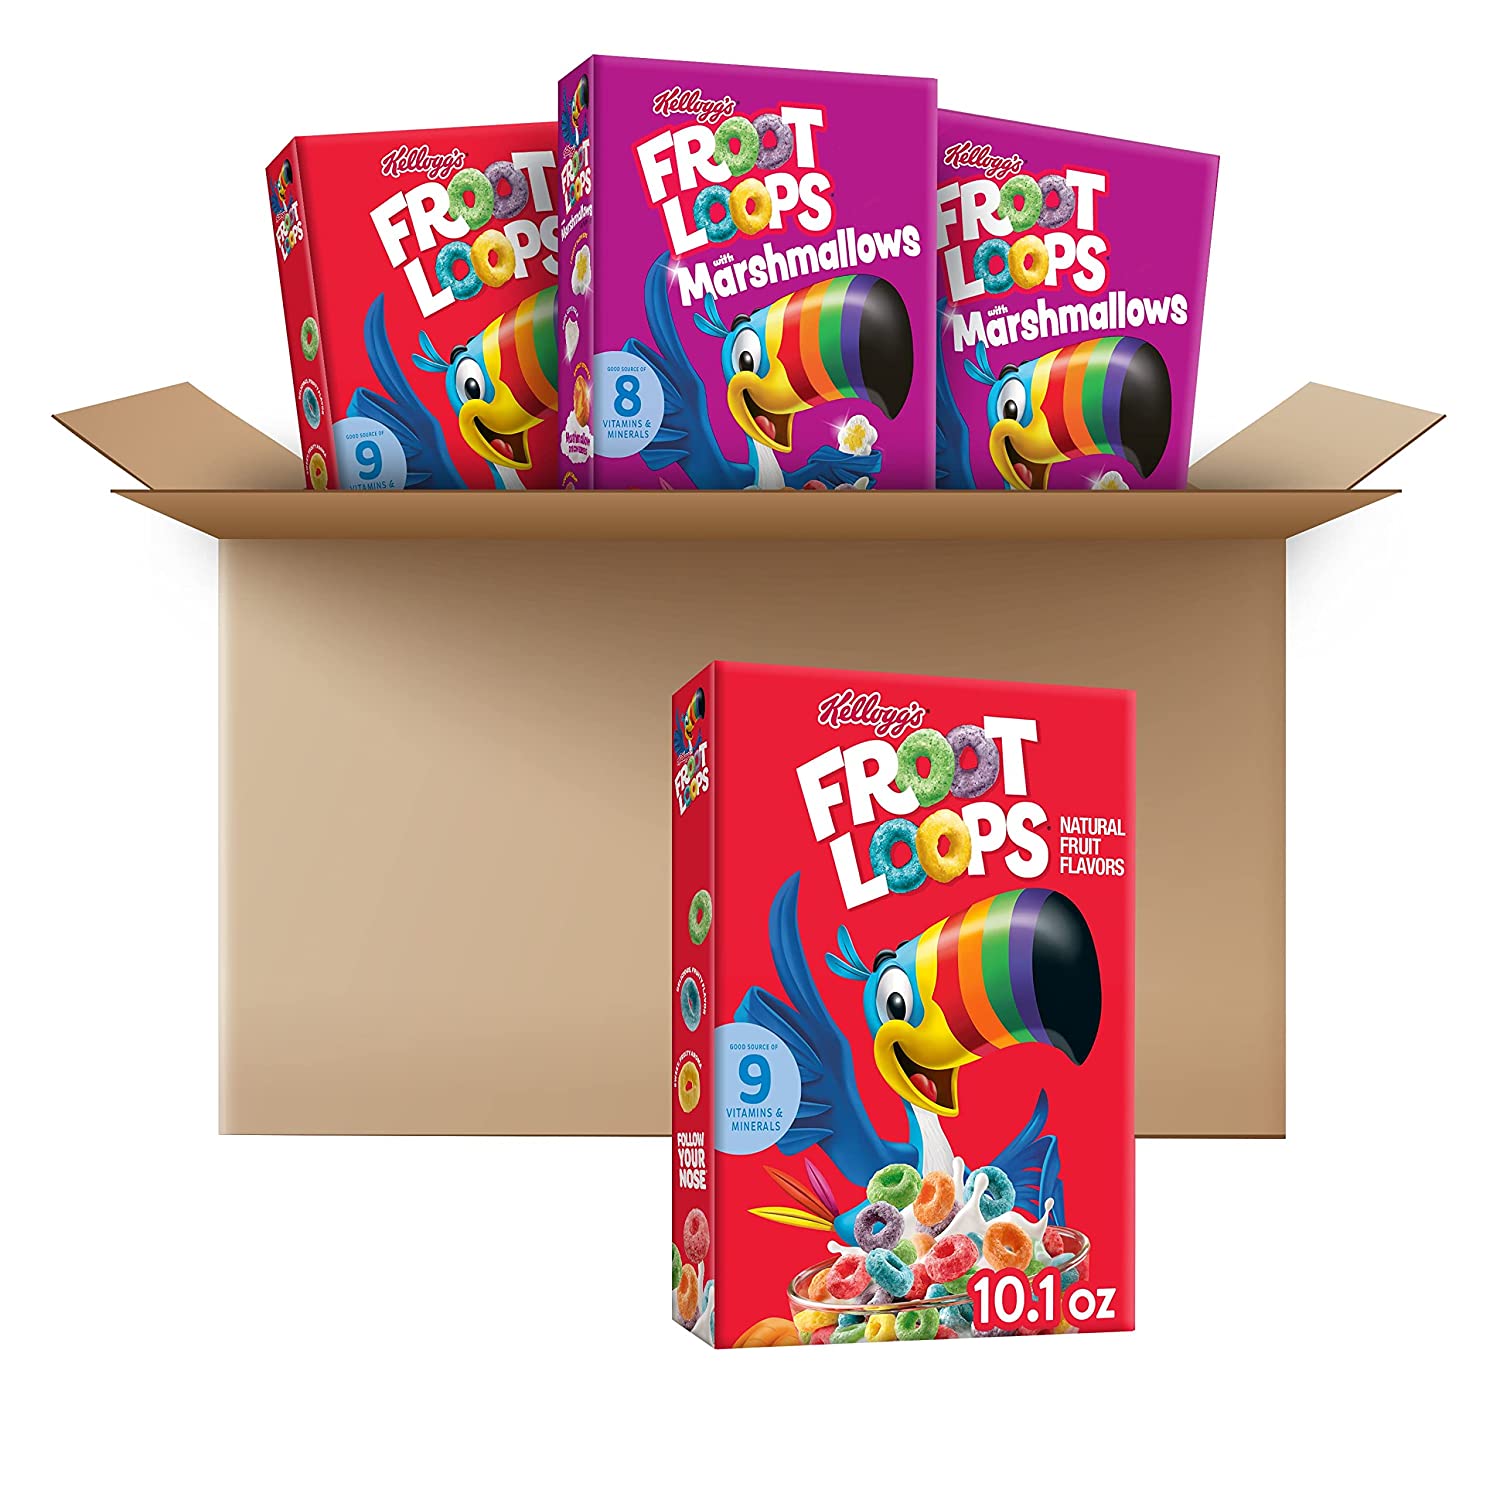 4 10 oz. Boxes - Kellogg's Froot Loops Kids Breakfast Cereal (2 Froot Loops / 2 w/Marshmallows) $9.88 w/s&s